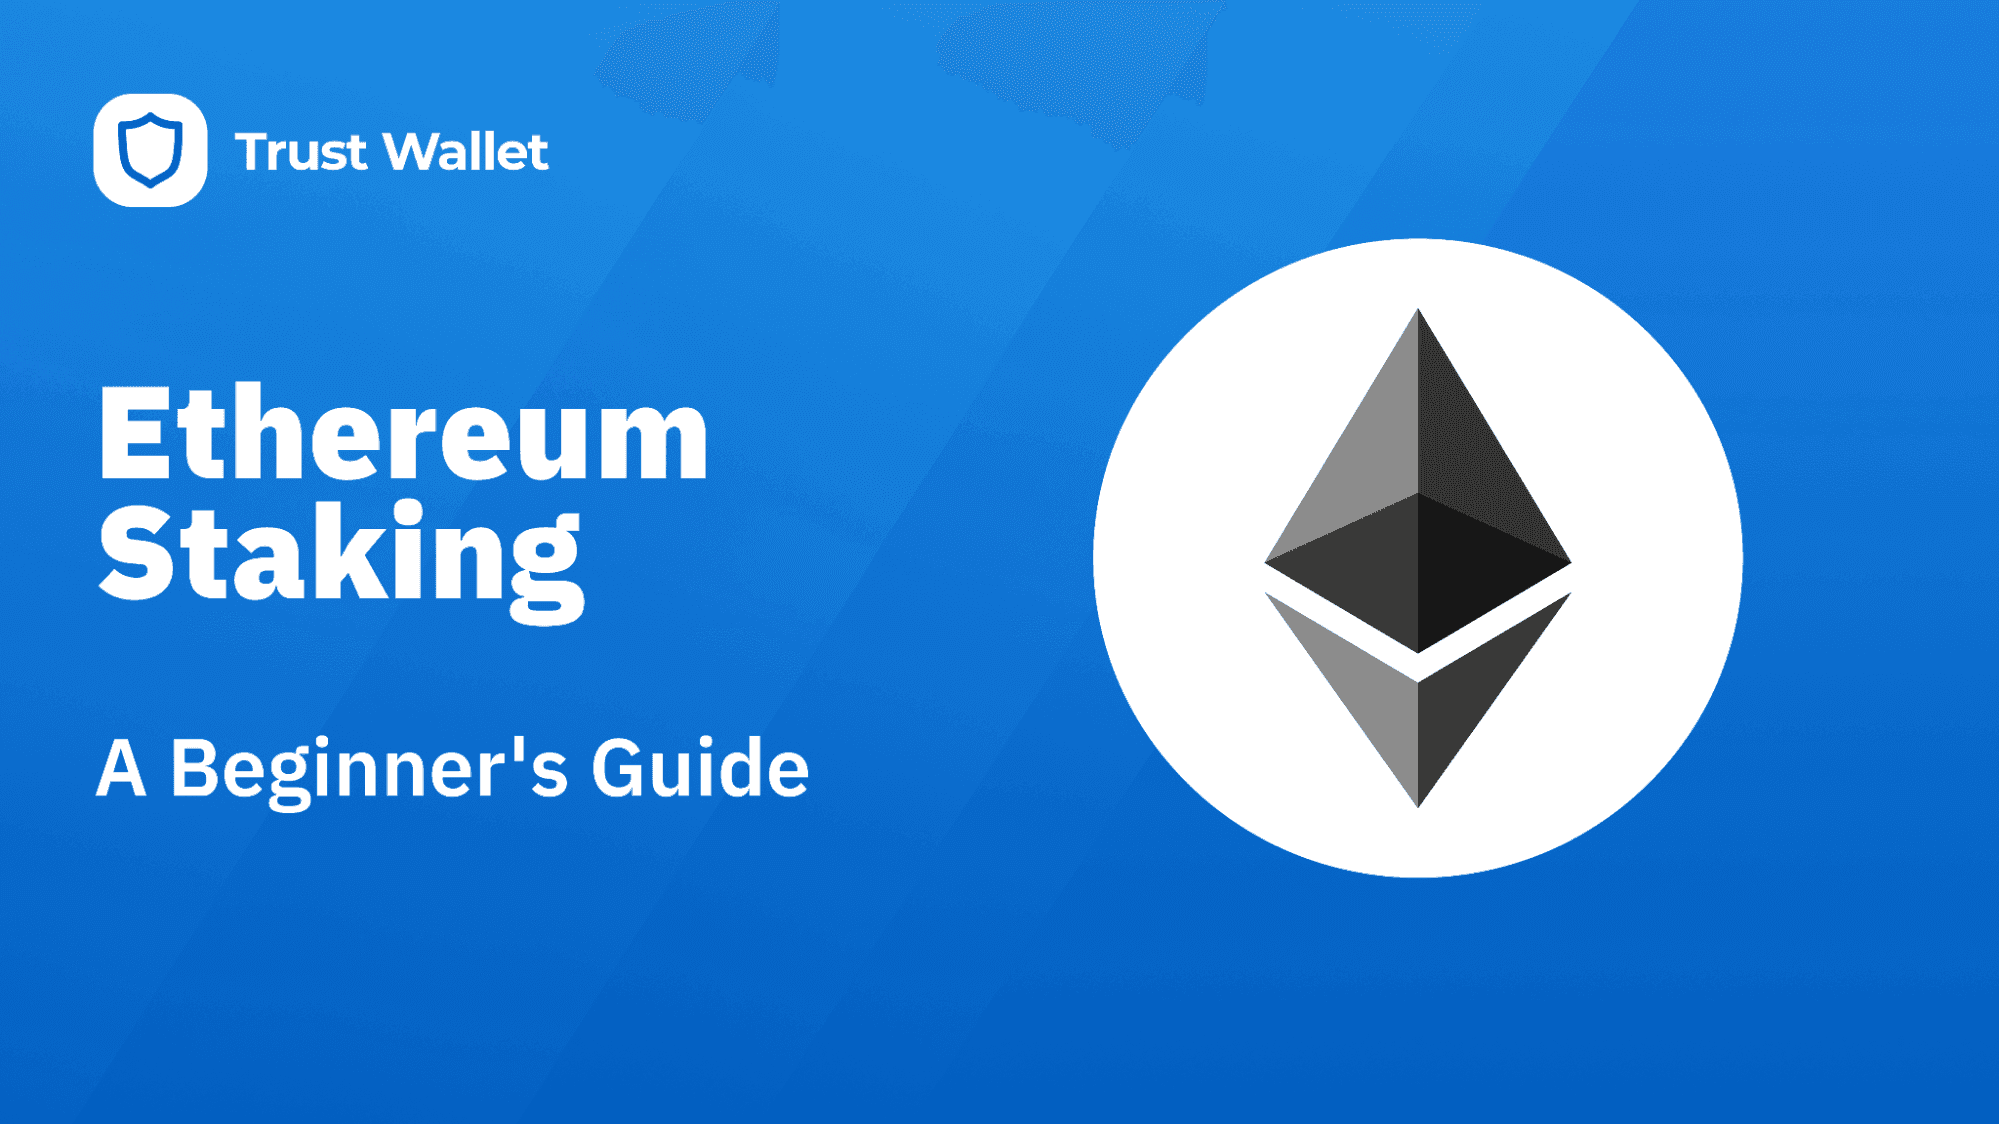 A Beginner's Guide to Ethereum Staking